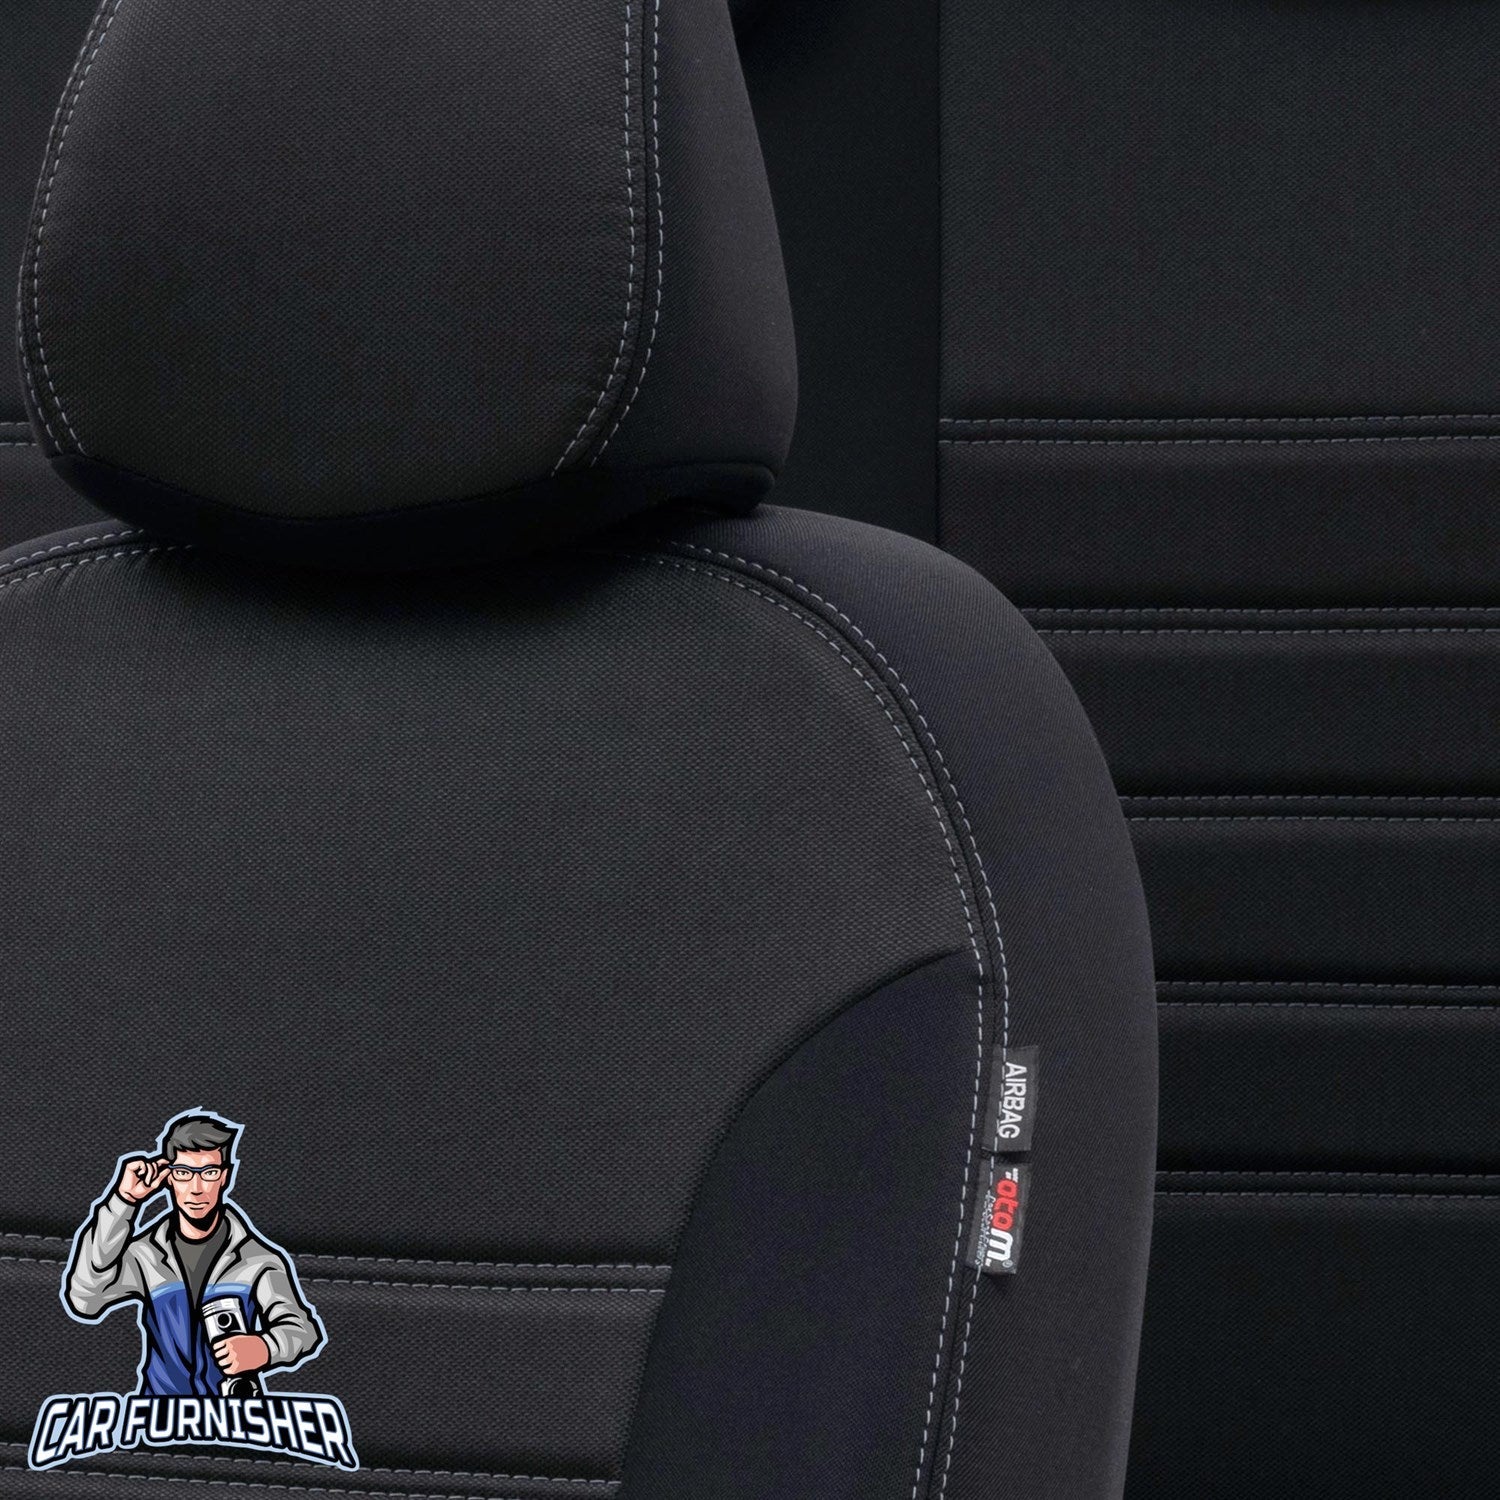 Volkswagen Sharan Seat Cover Tokyo Foal Feather Design Black Jacquard Fabric